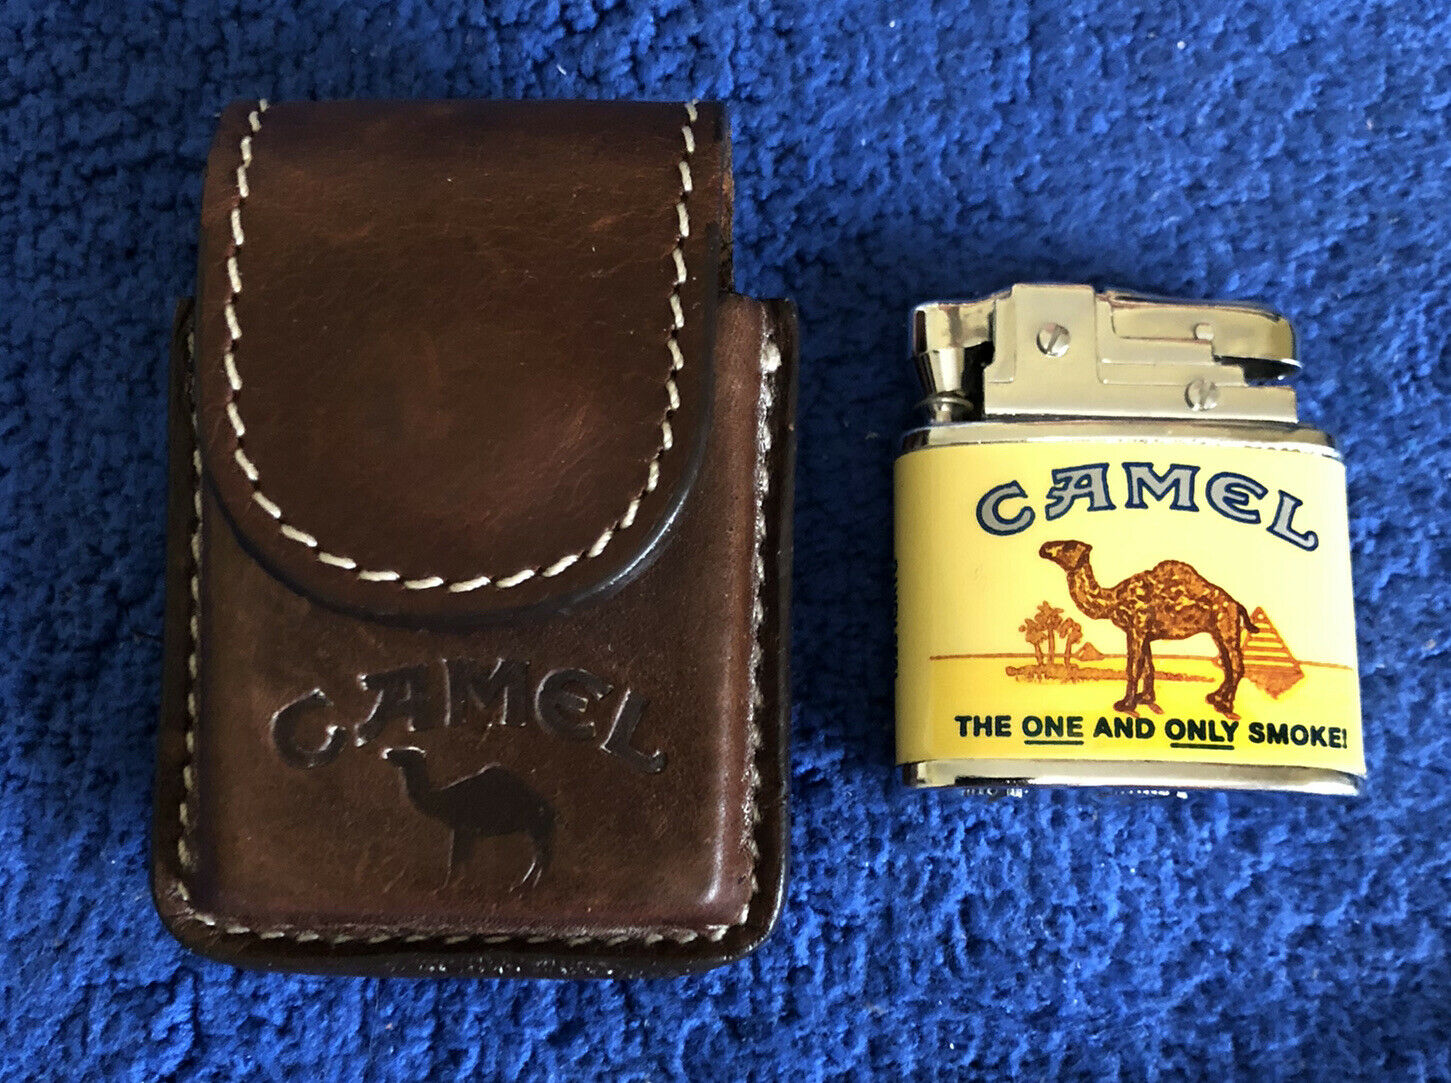 Vintage 1995 Rjrtc "camel The One And Only Smoke"  Lighter Never Lit W/case